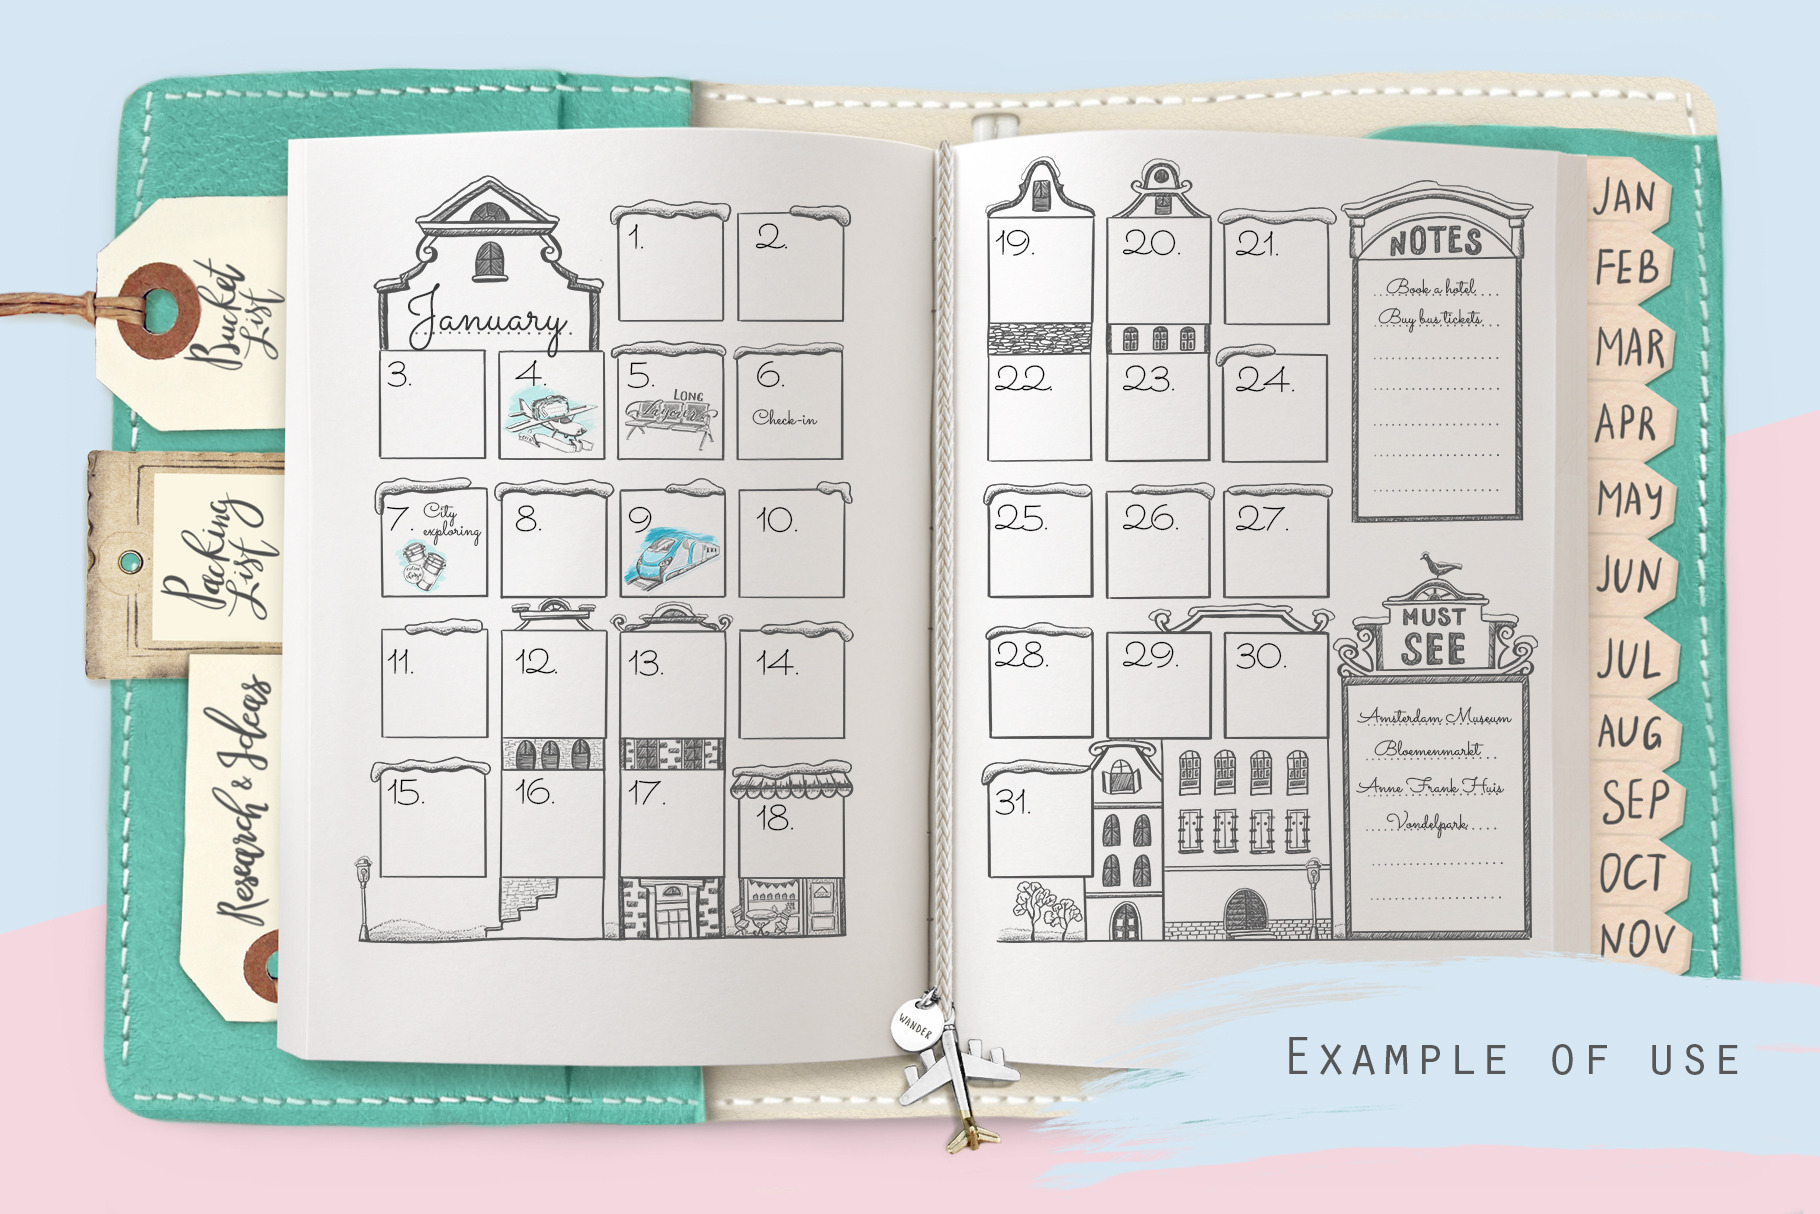 Undated monthly calendar template - Stationery - 2